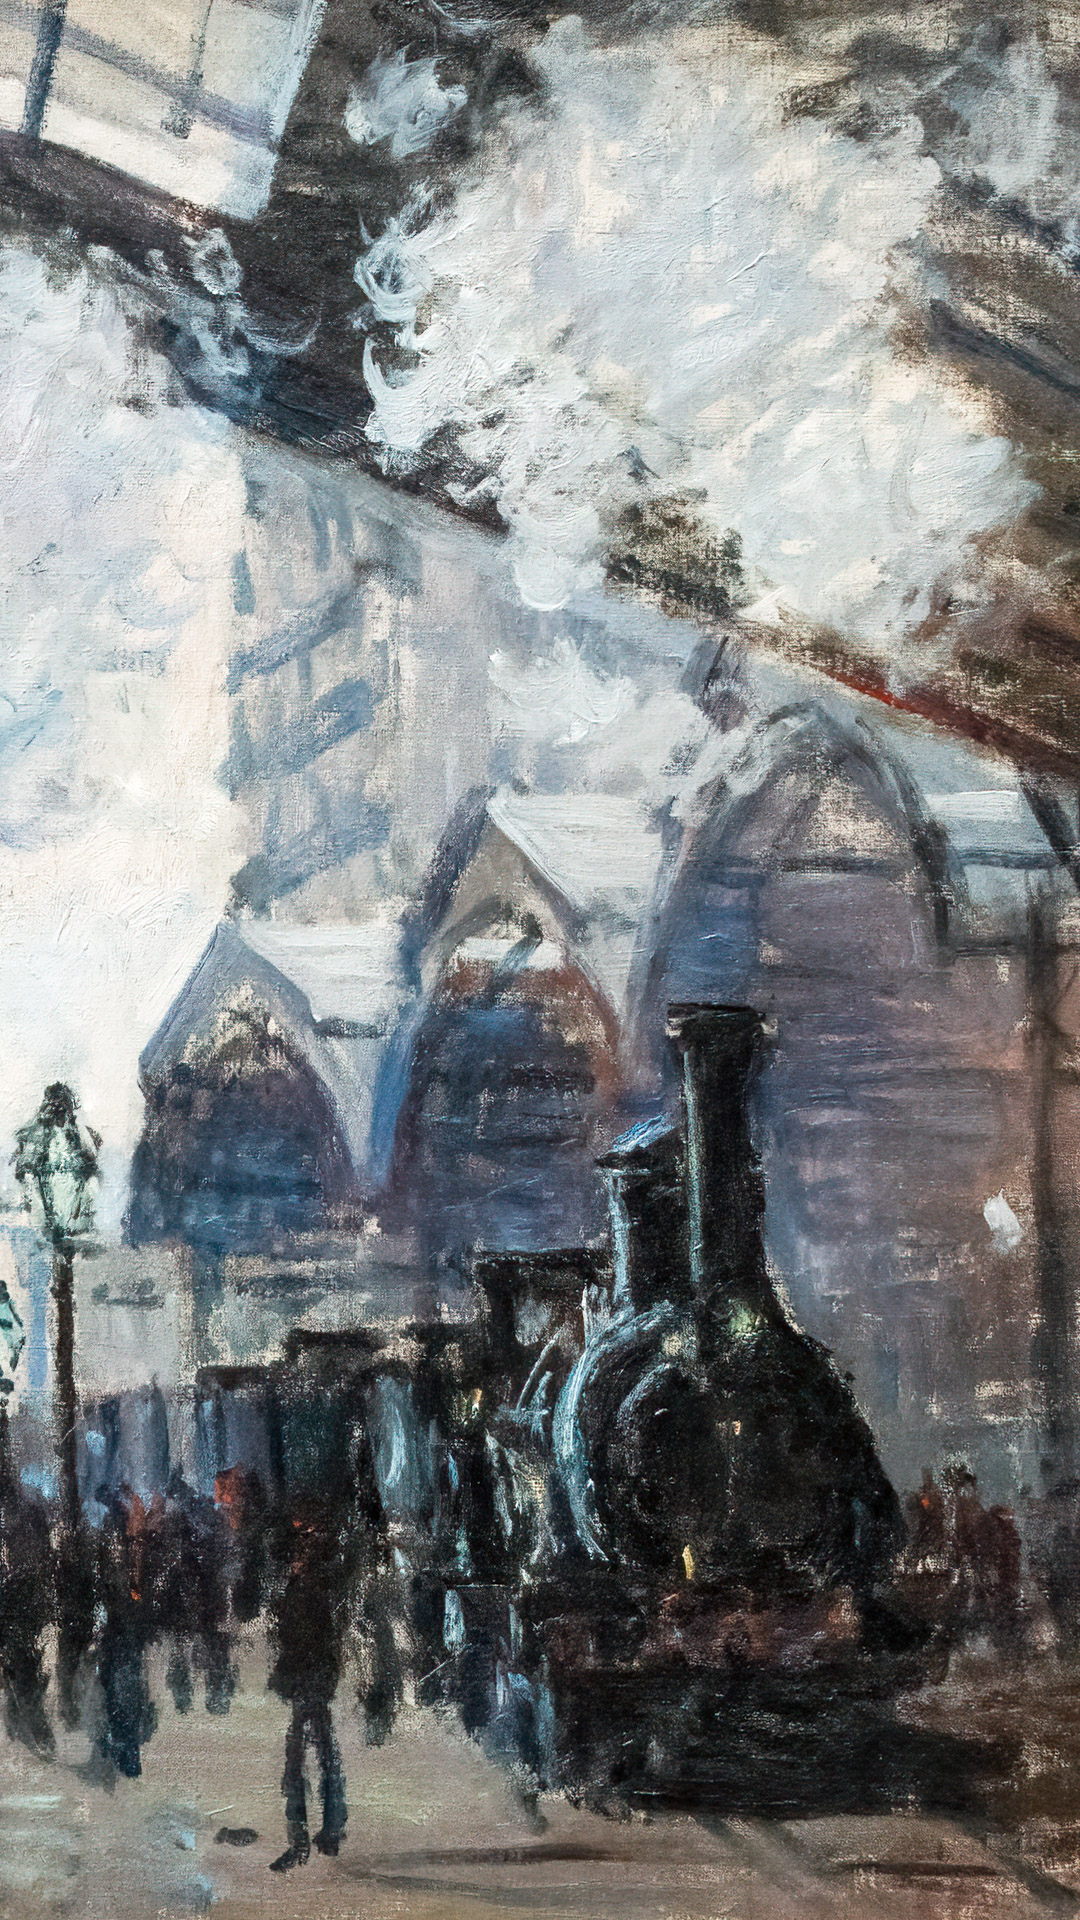 Journey through Claude Monet's La Gare Saint-Lazare, where the beauty of Impressionism comes to life in high definition.